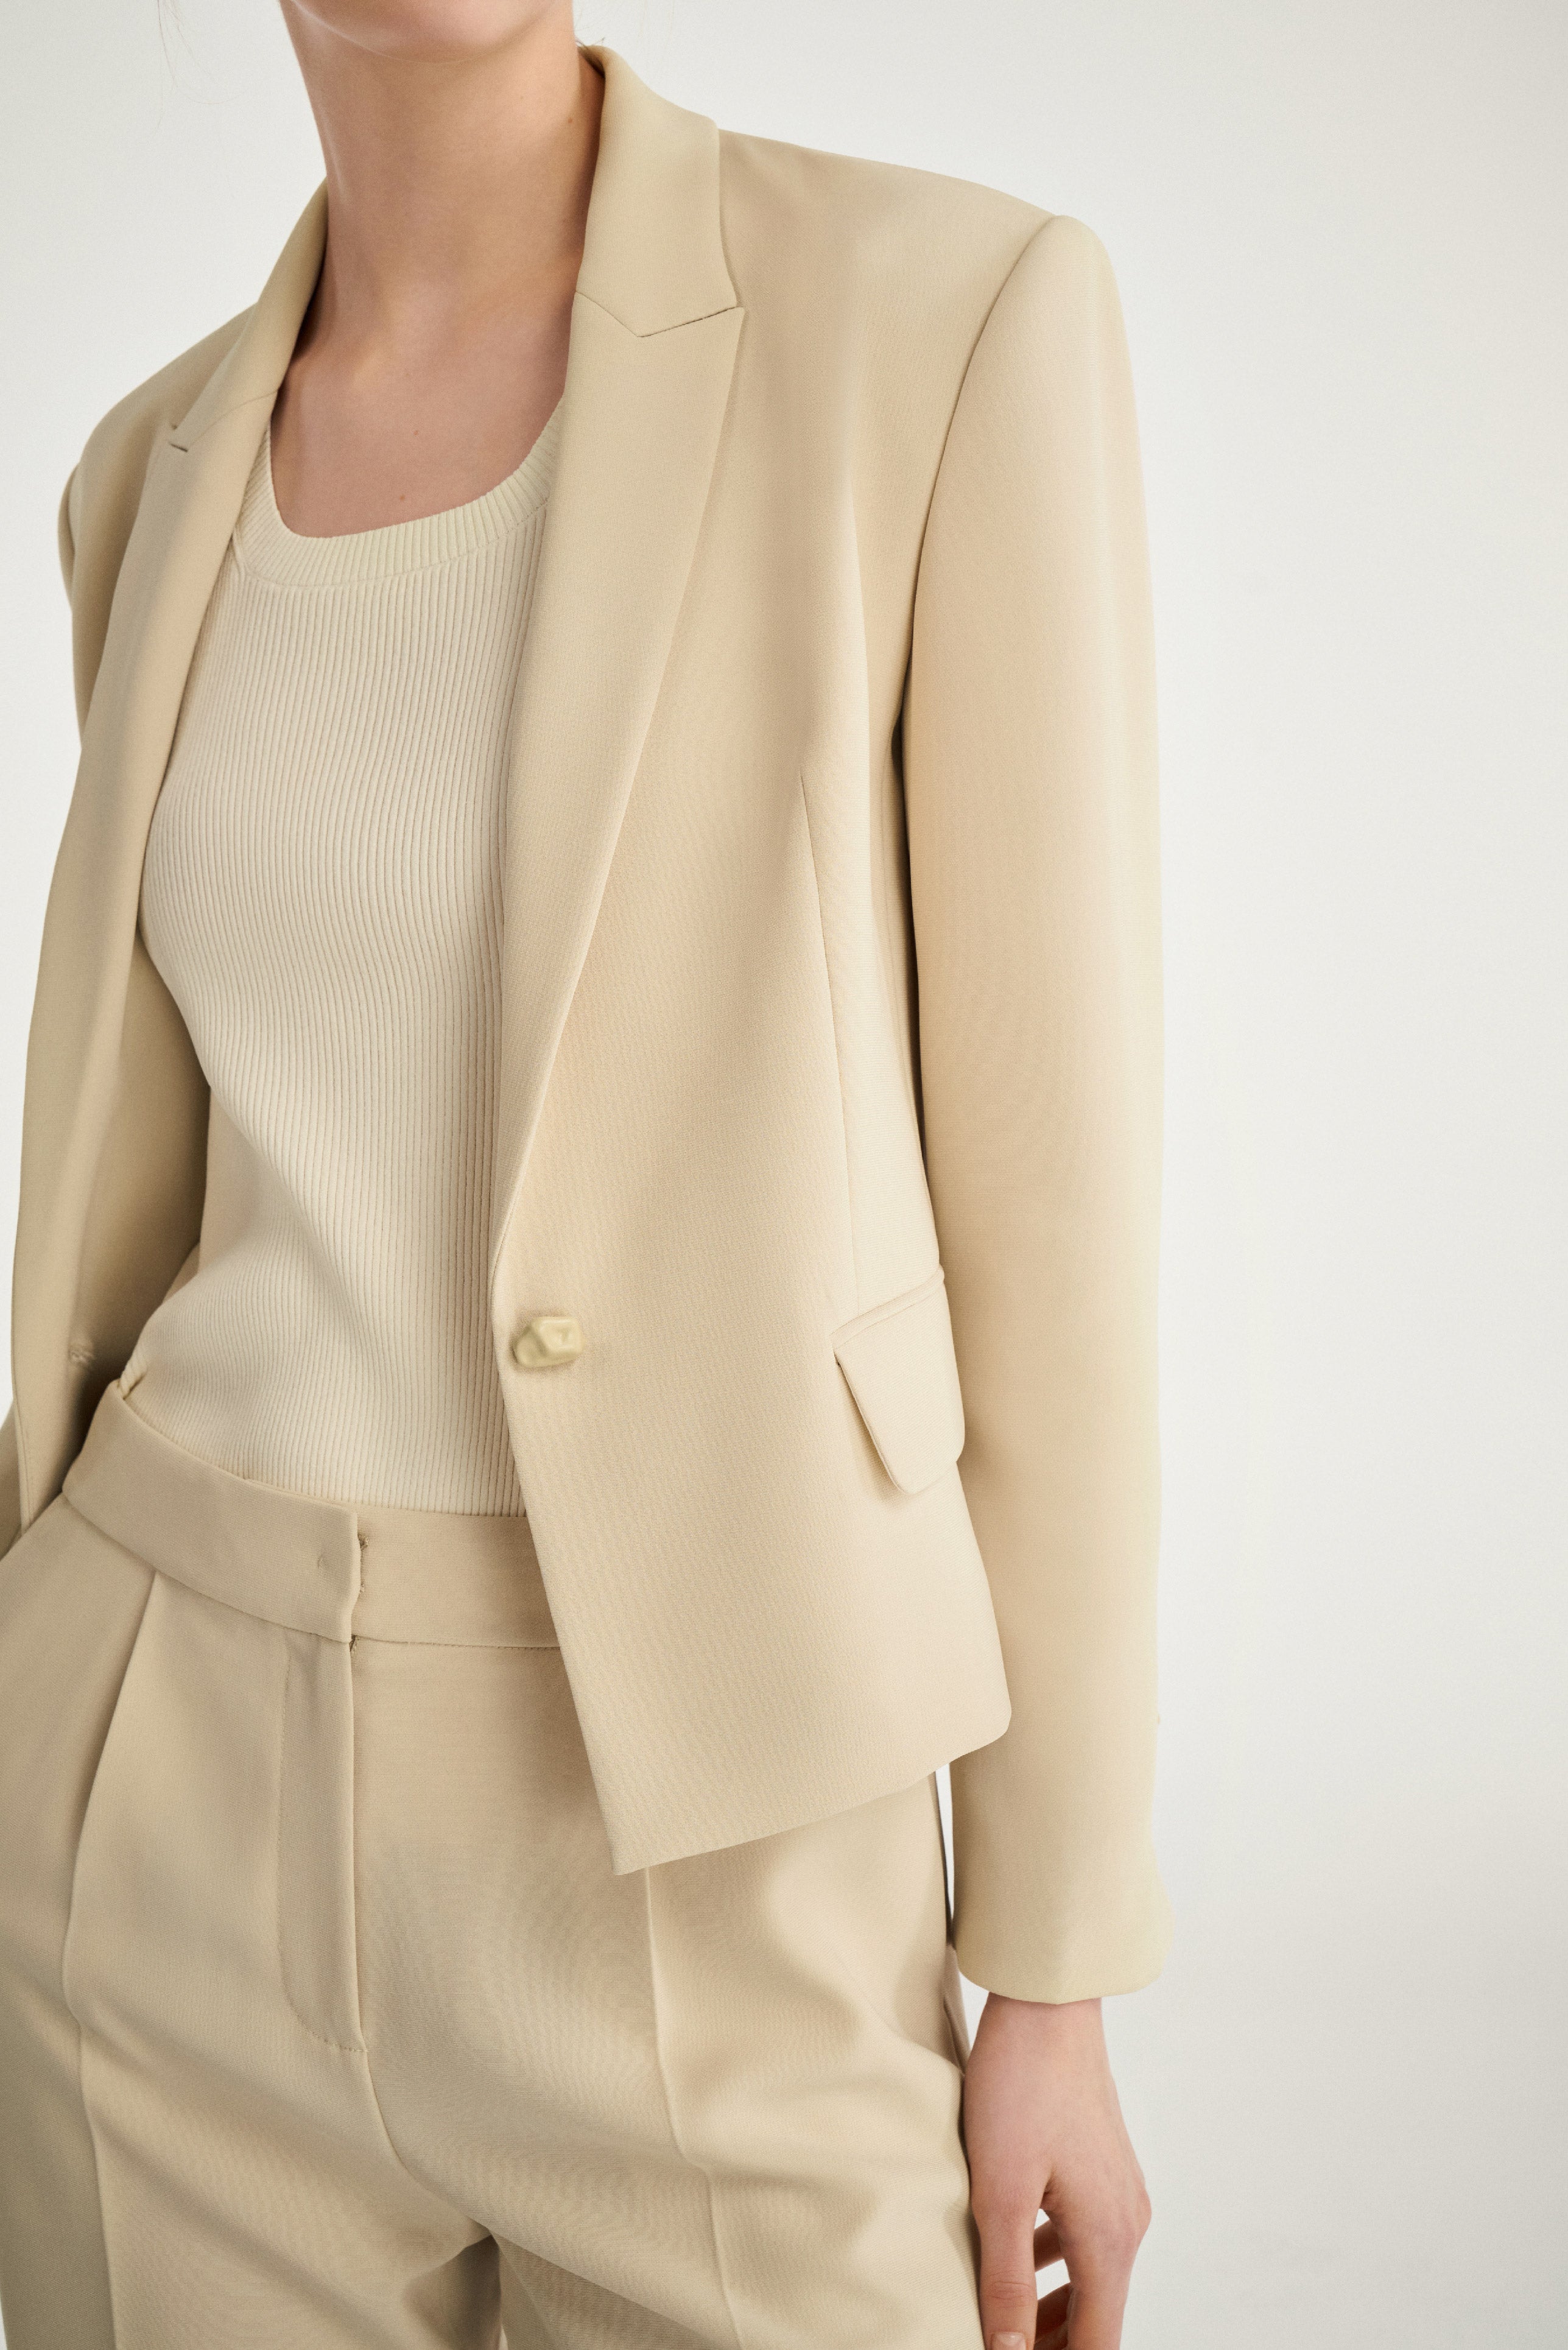 Laurèl Short-Length Blazer With A Double-Layered Collar